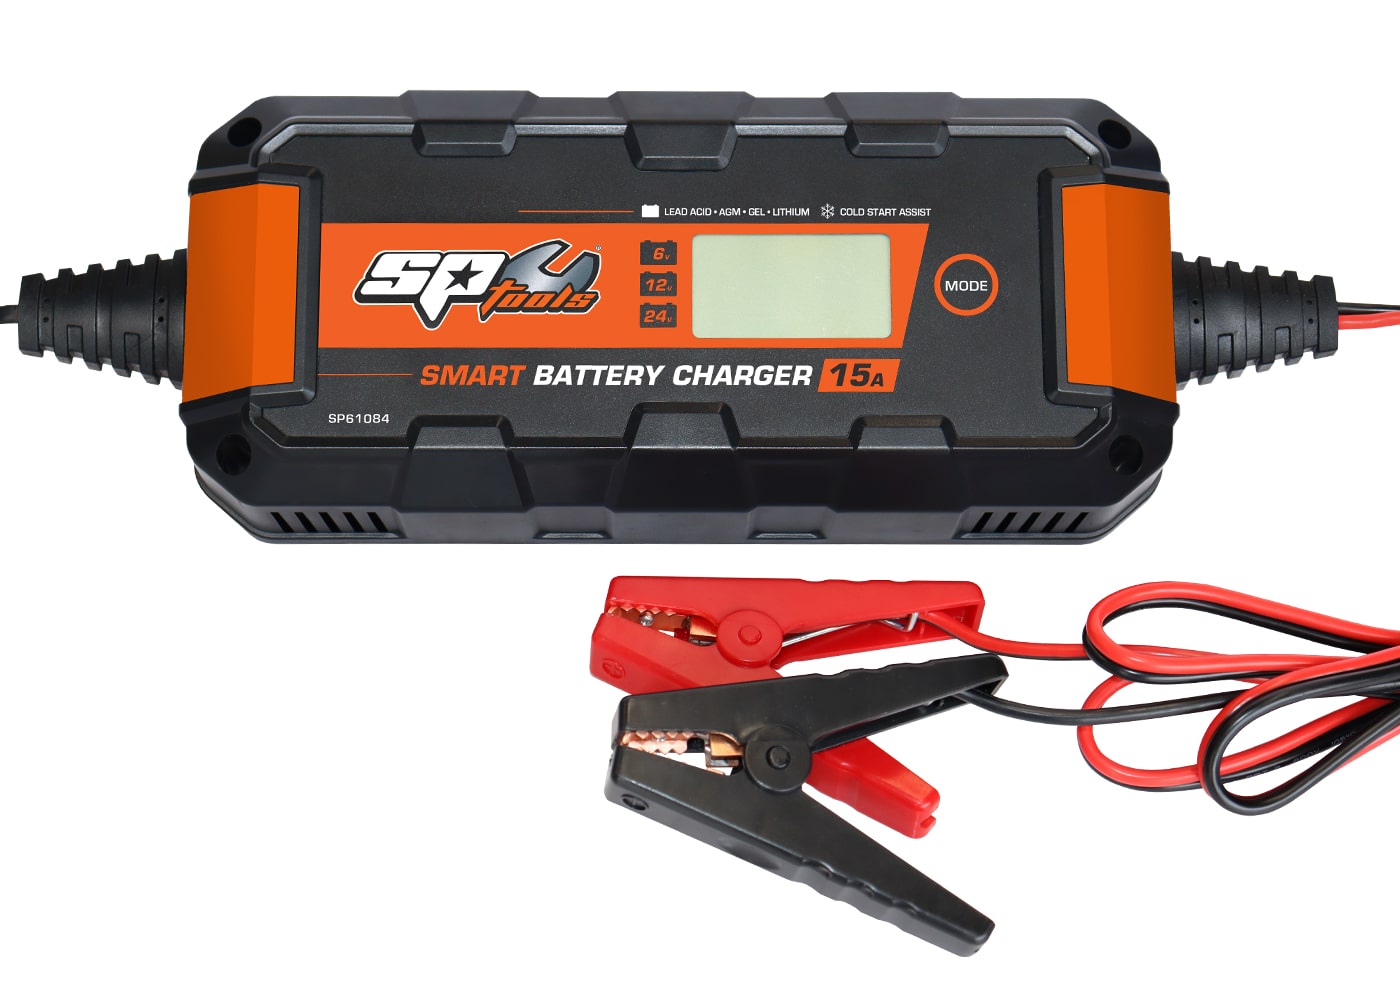 Smart Battery Charger 8 Stage Multi Volt 6, 12 & 24V 15A - SP61084 by SP Tools